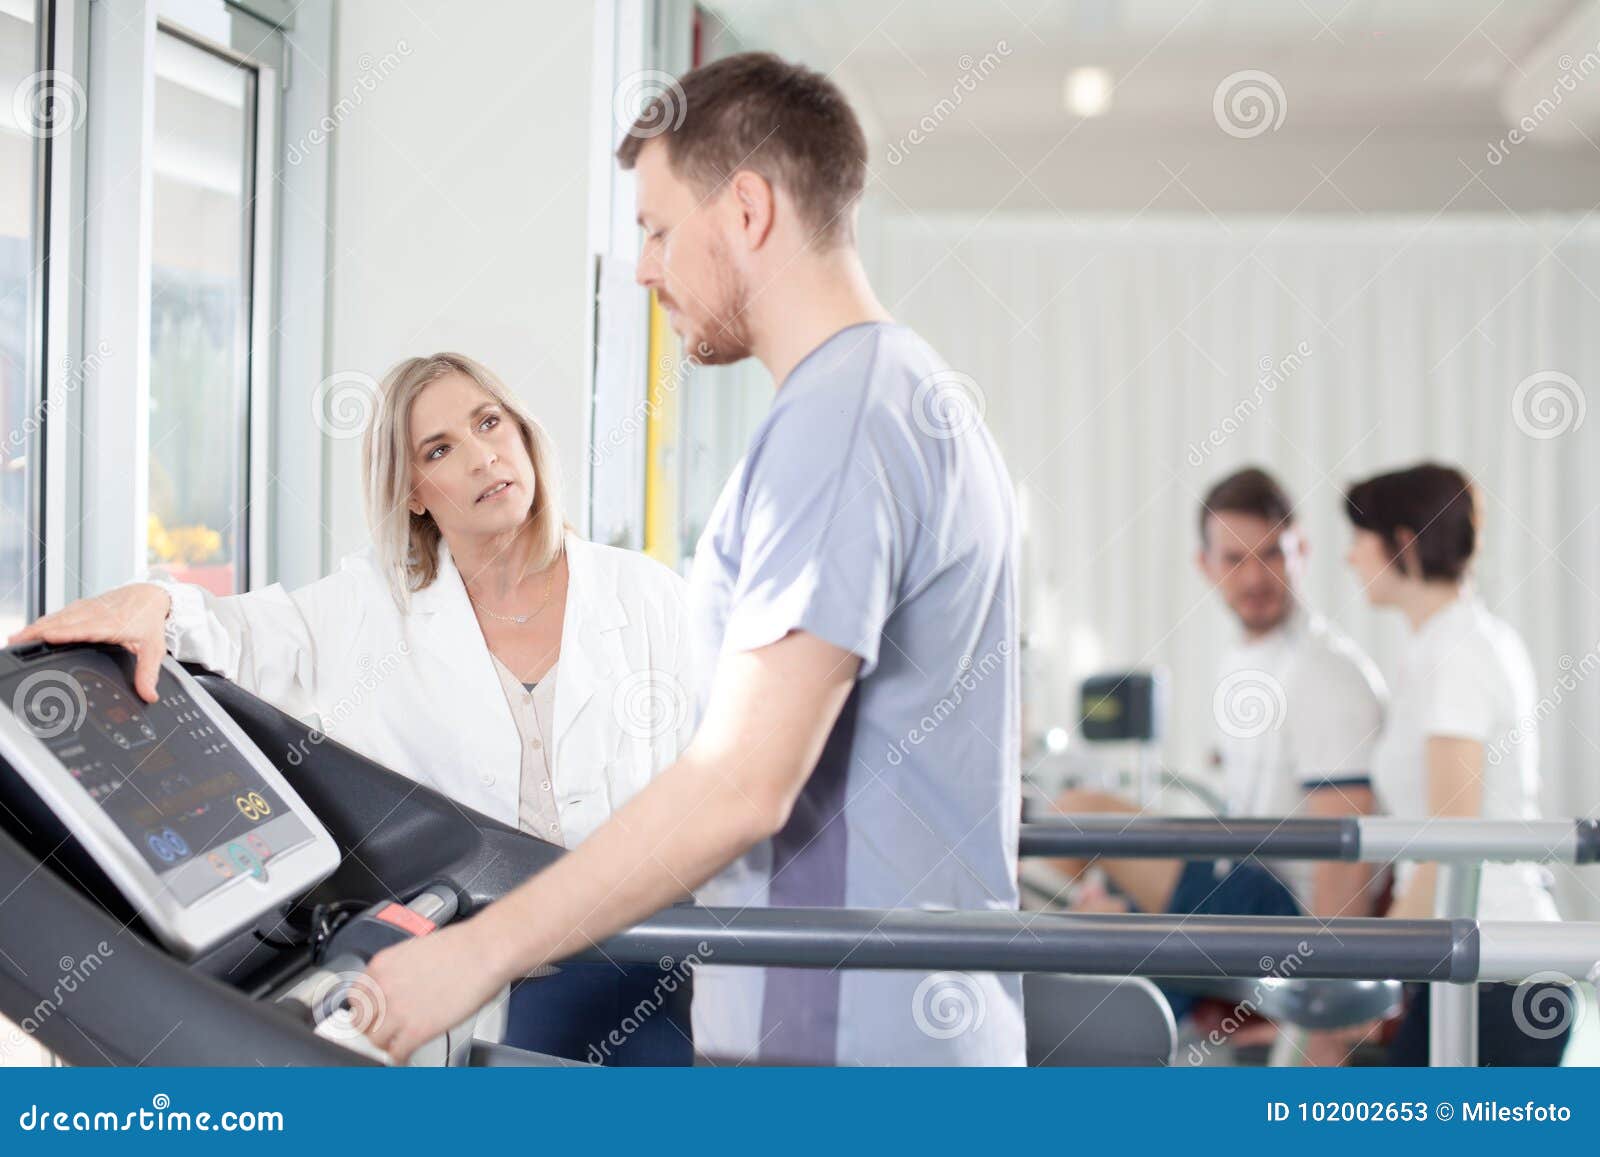 athlete on a treadmill with physiotherapist doctor